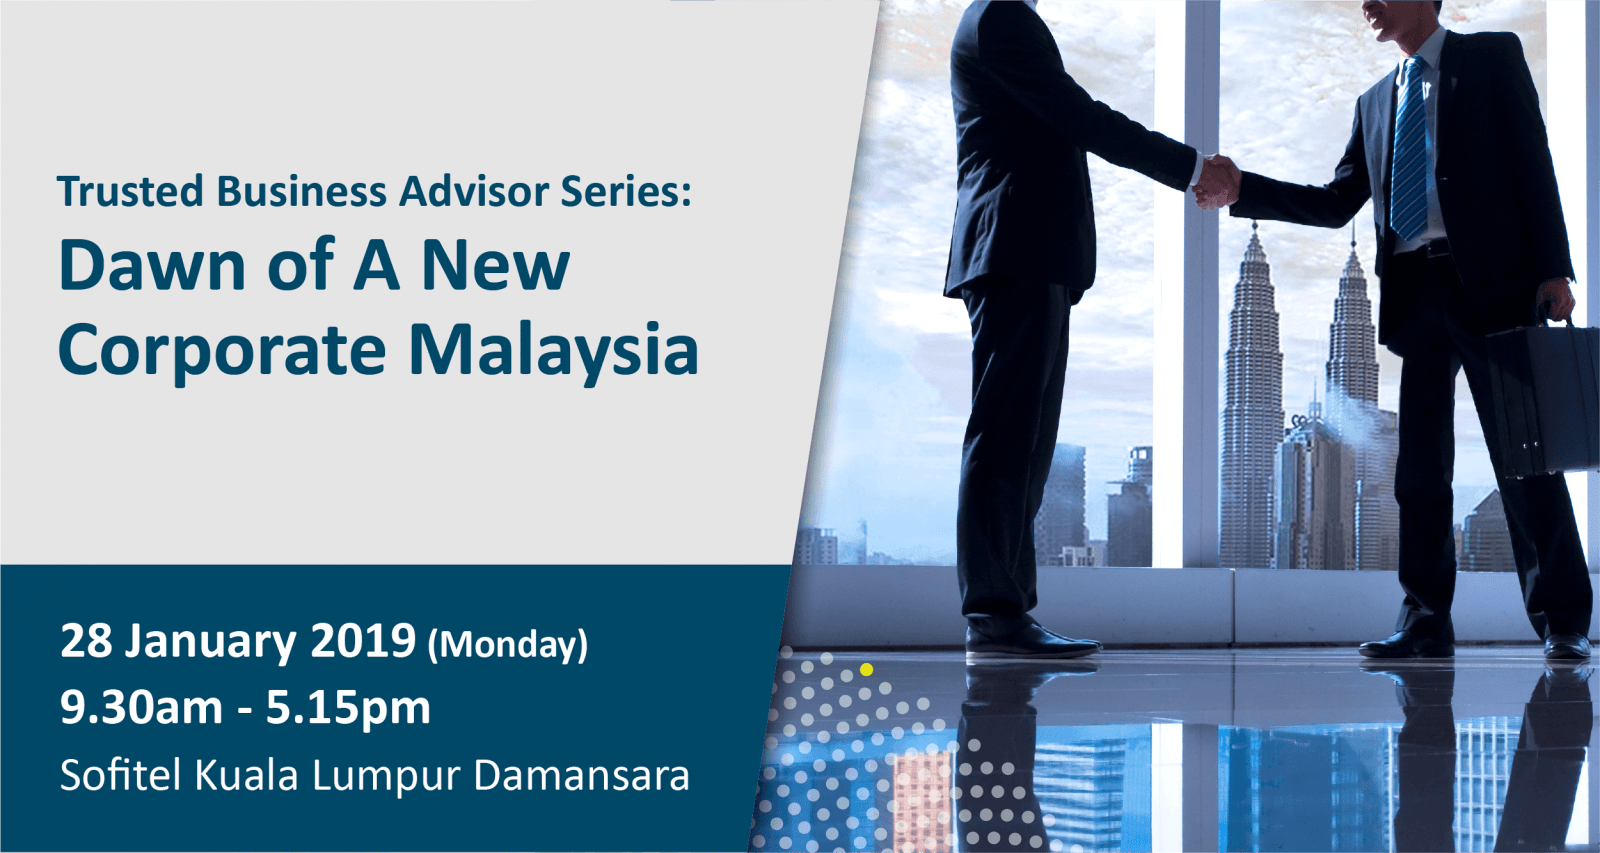 Trusted Business Advisor Series Event: Dawn of a New Corporate Malaysia